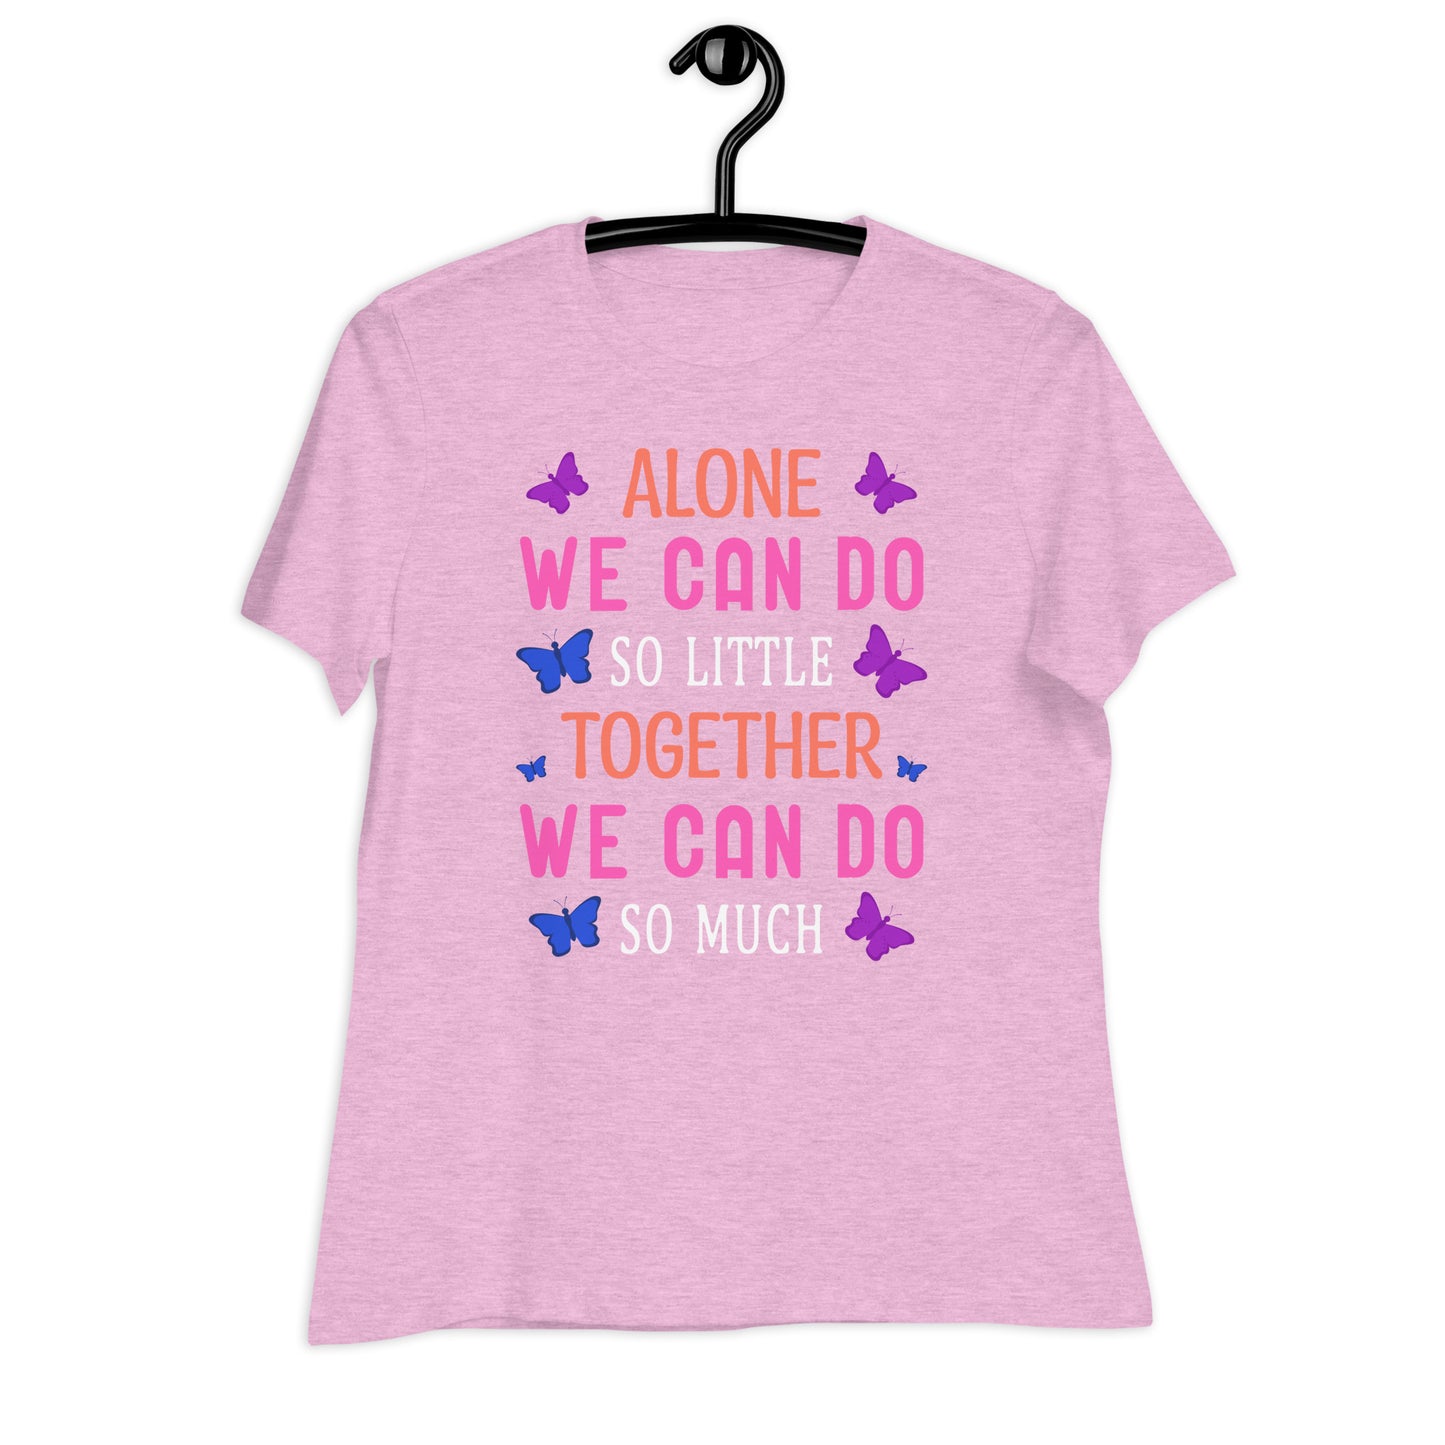 Together We Can Do So Much Bella Canvas Relaxed Women's T-Shirt